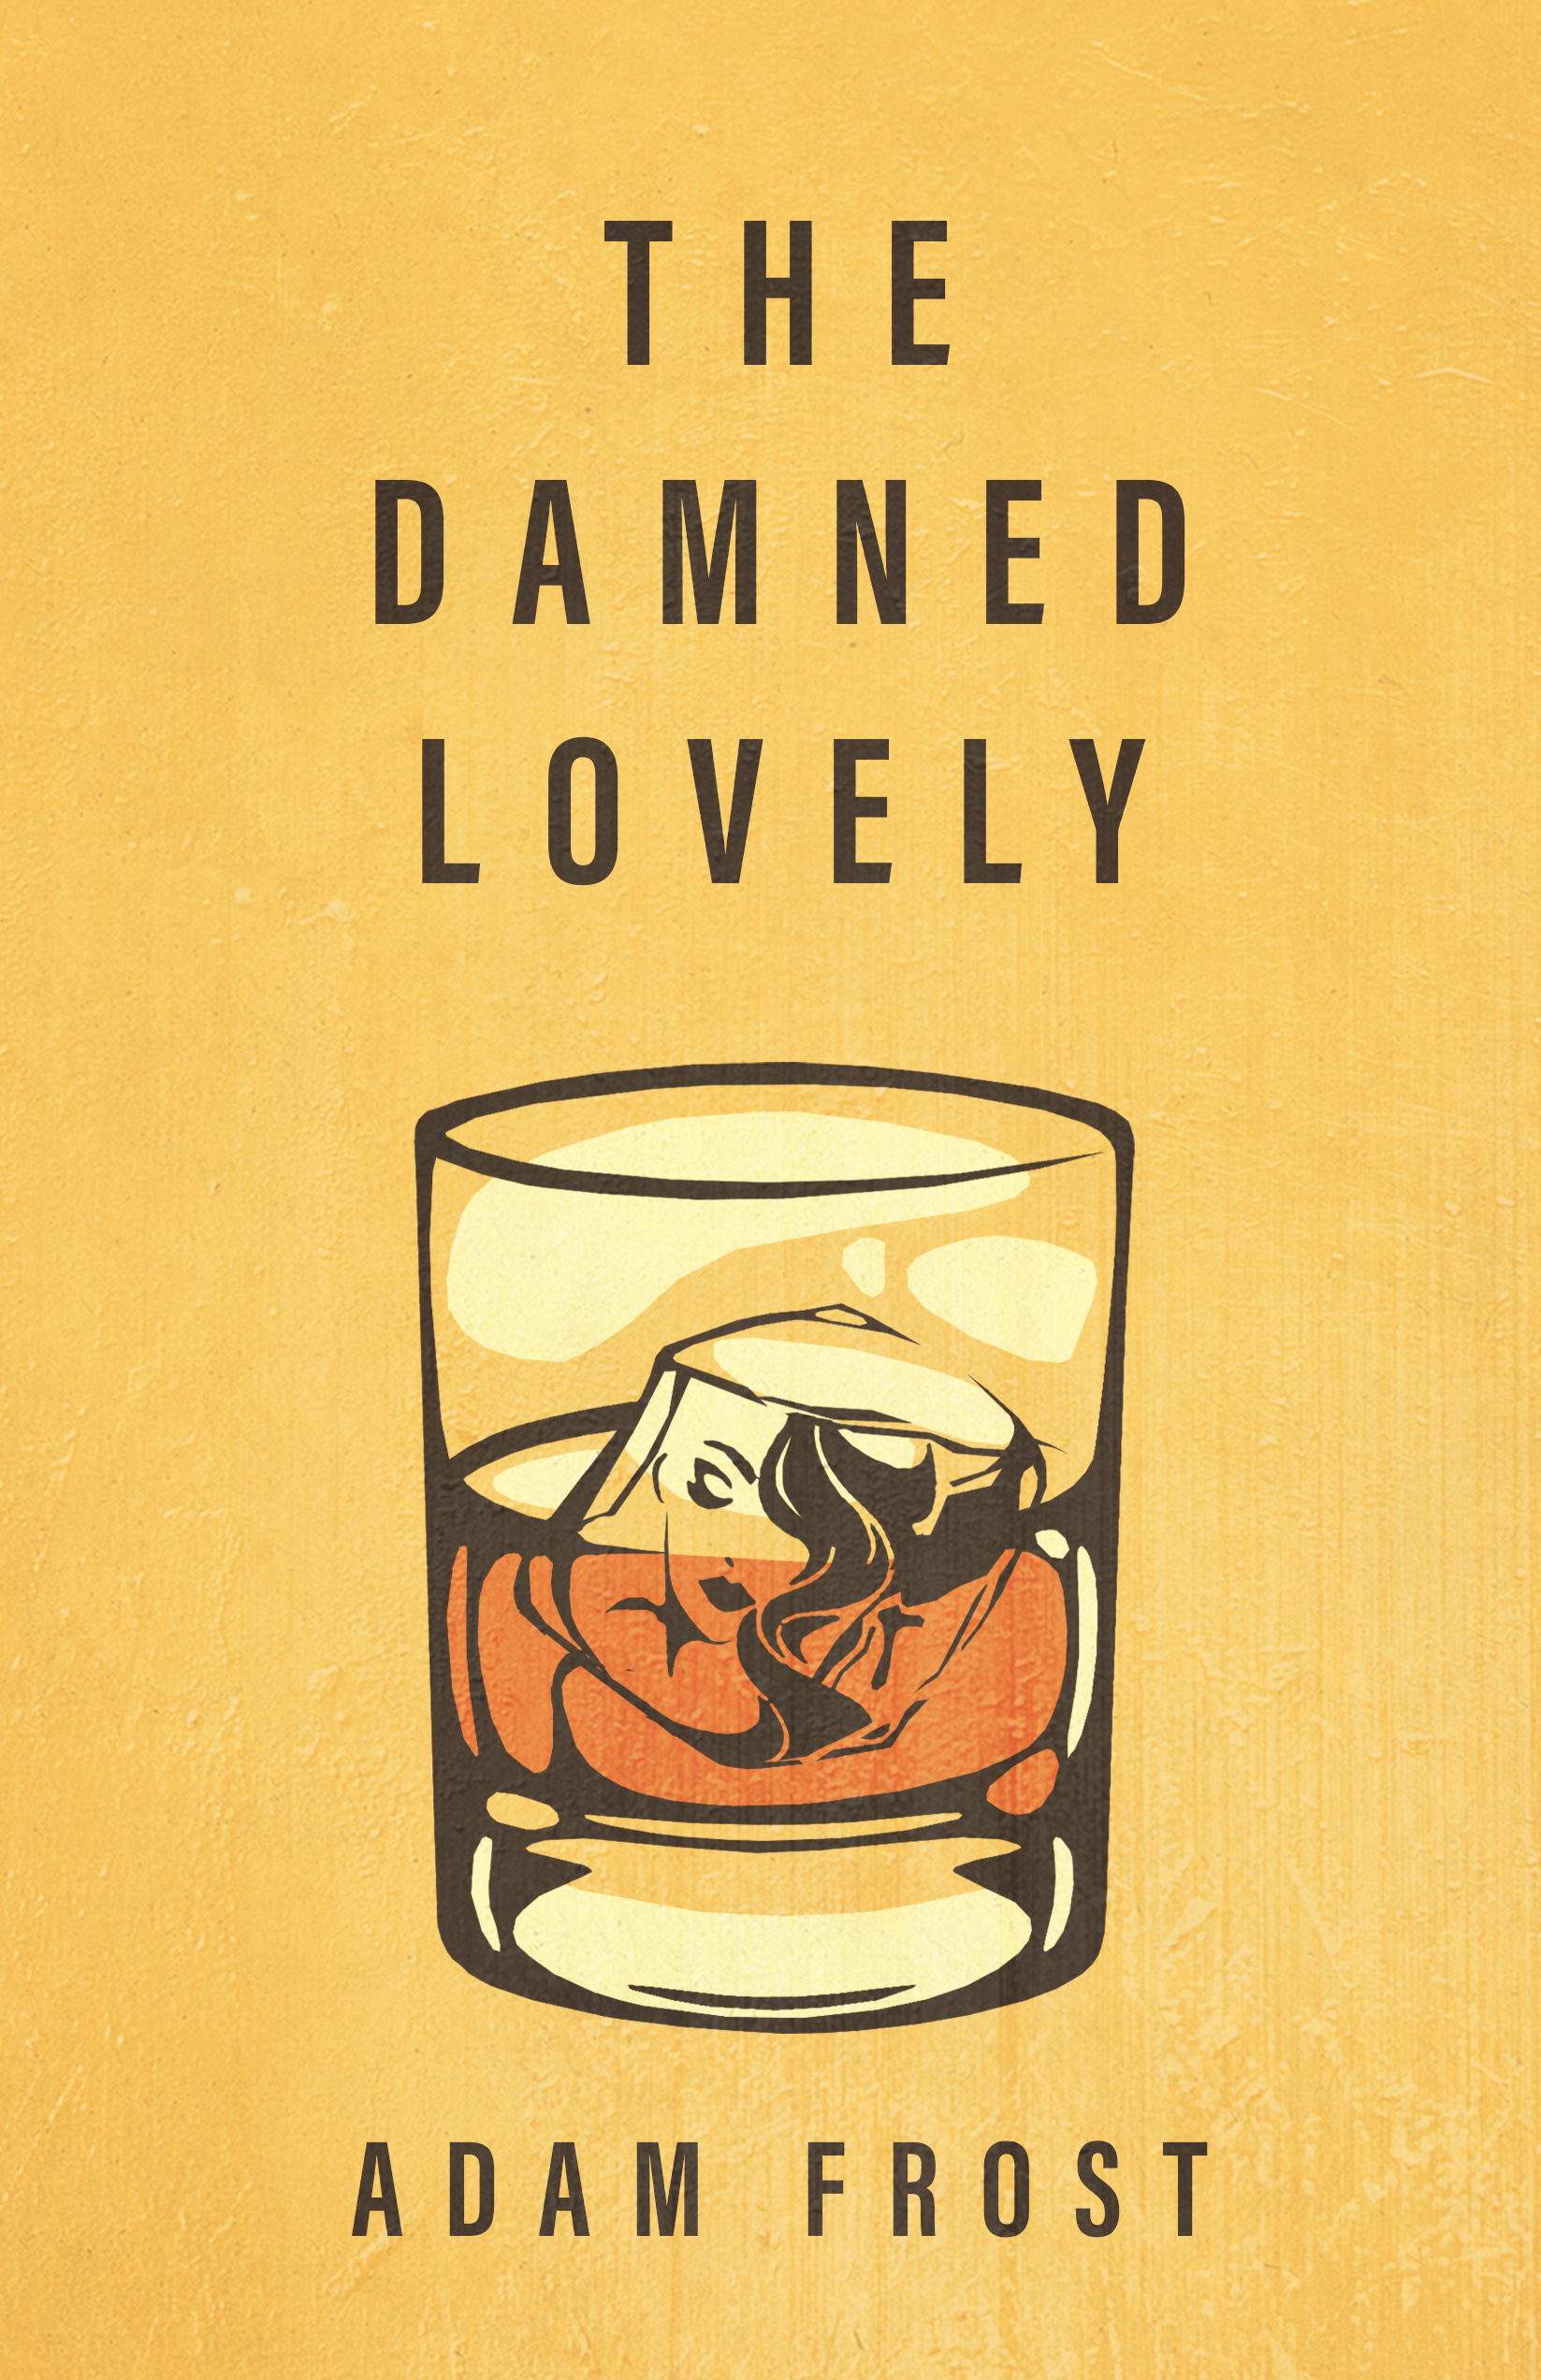 The Damned Lovely by Adam Frost